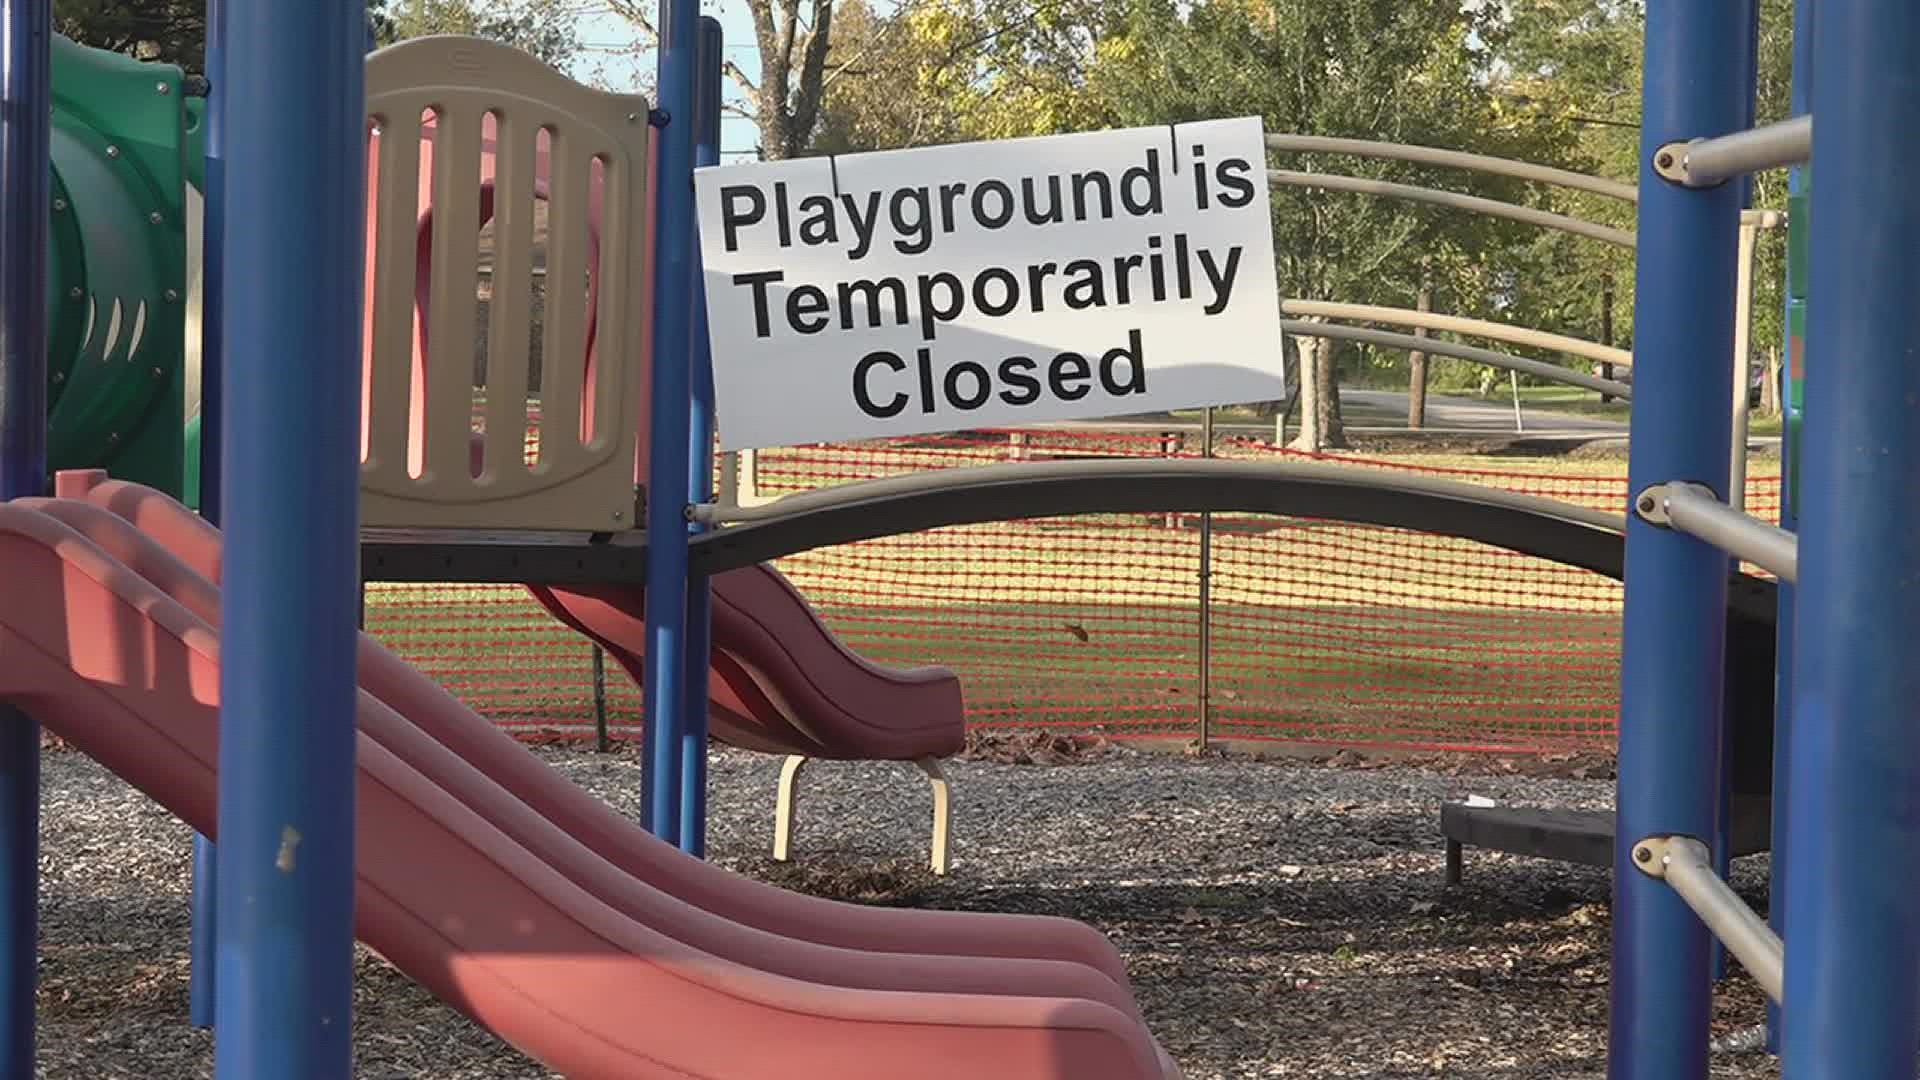 During the city council meeting on Tuesday, council members approved $1.4 million for playgrounds across Beaumont.